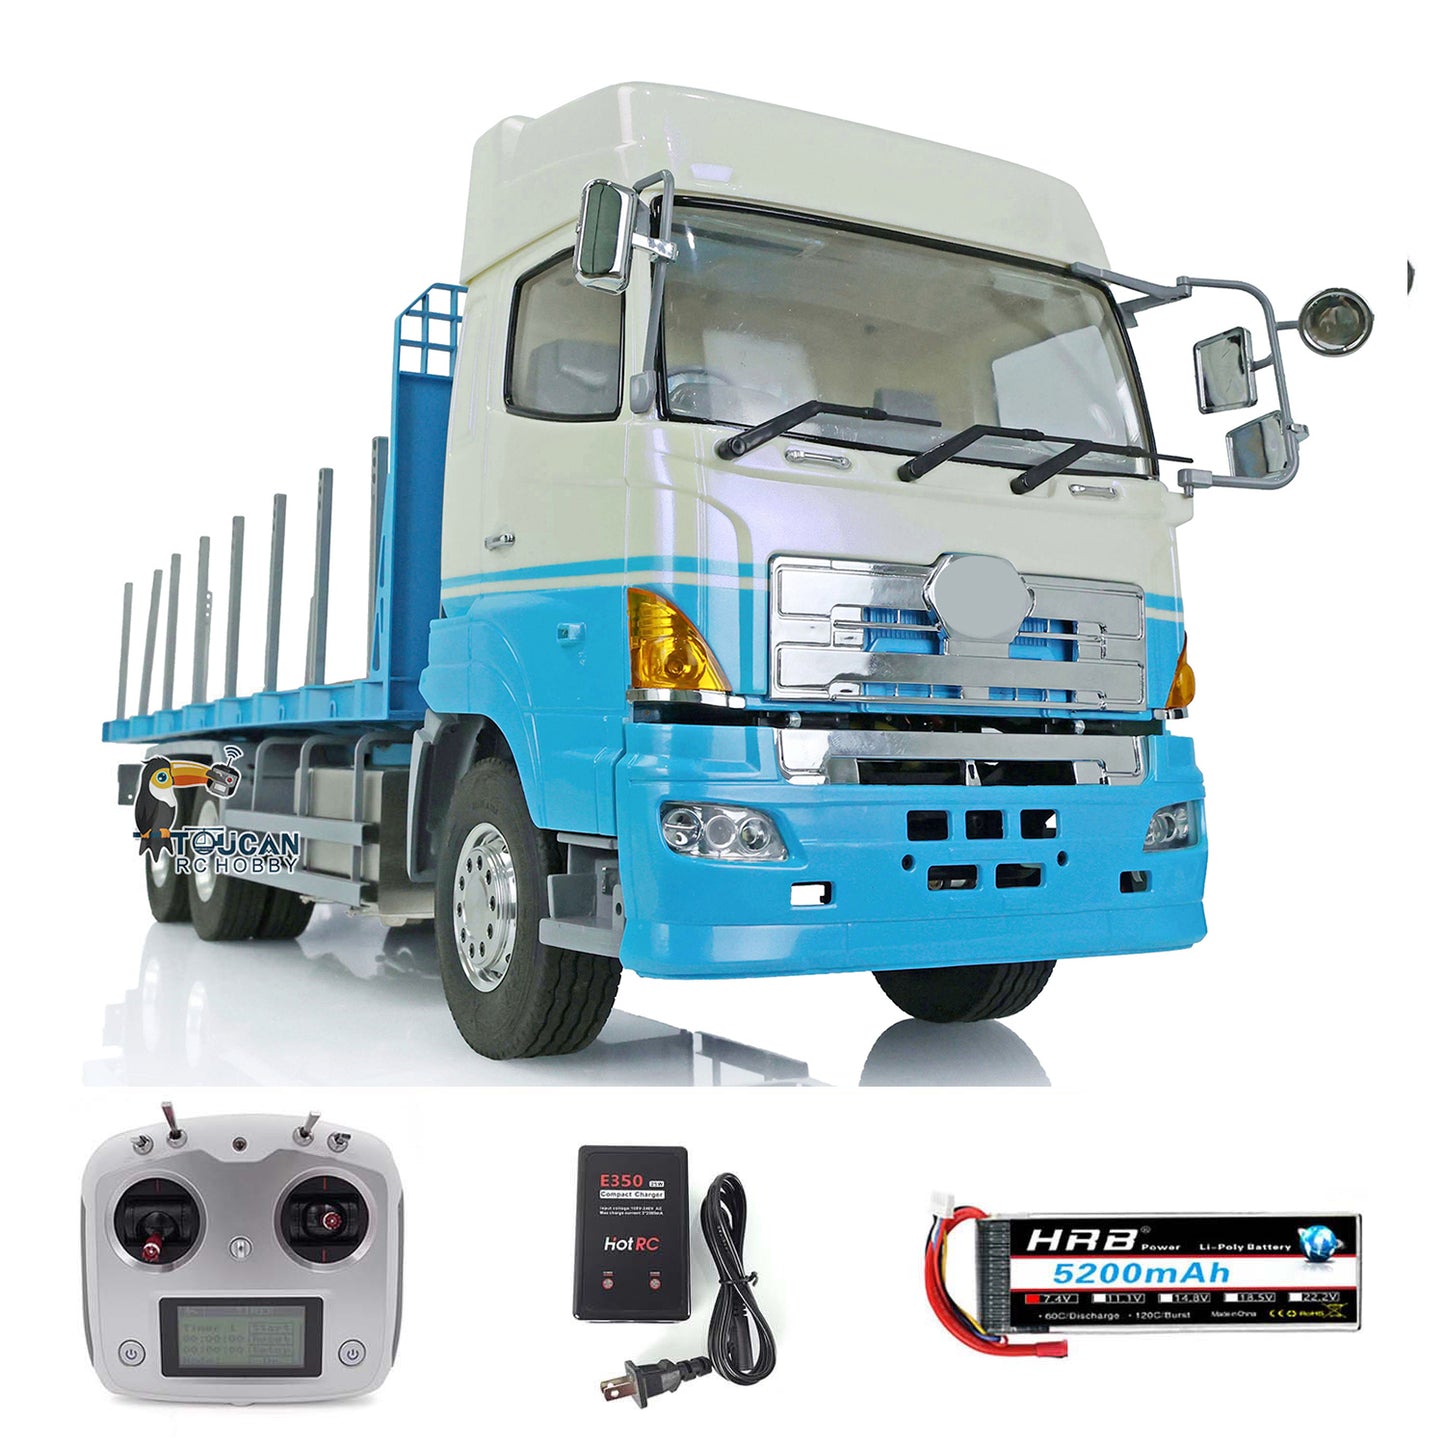 LESU 1/14 6x4 Ready to Go RC Flatbed Lorry Trailer Light Sound Radio System Bucket Motor Servo Battery Charger Painted Truck